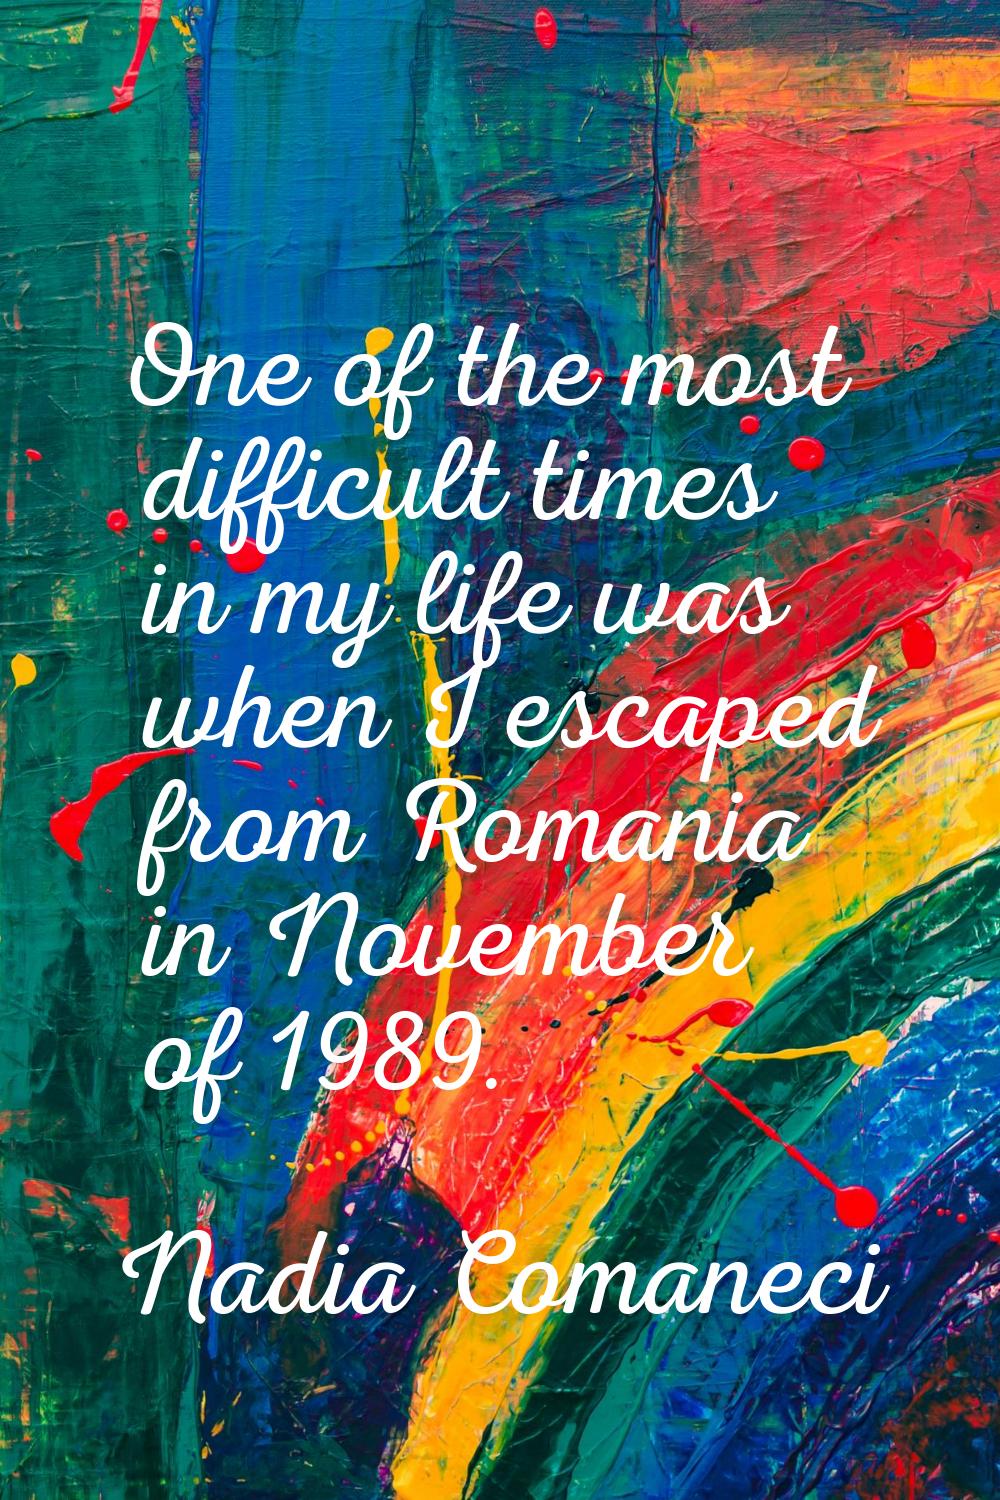 One of the most difficult times in my life was when I escaped from Romania in November of 1989.